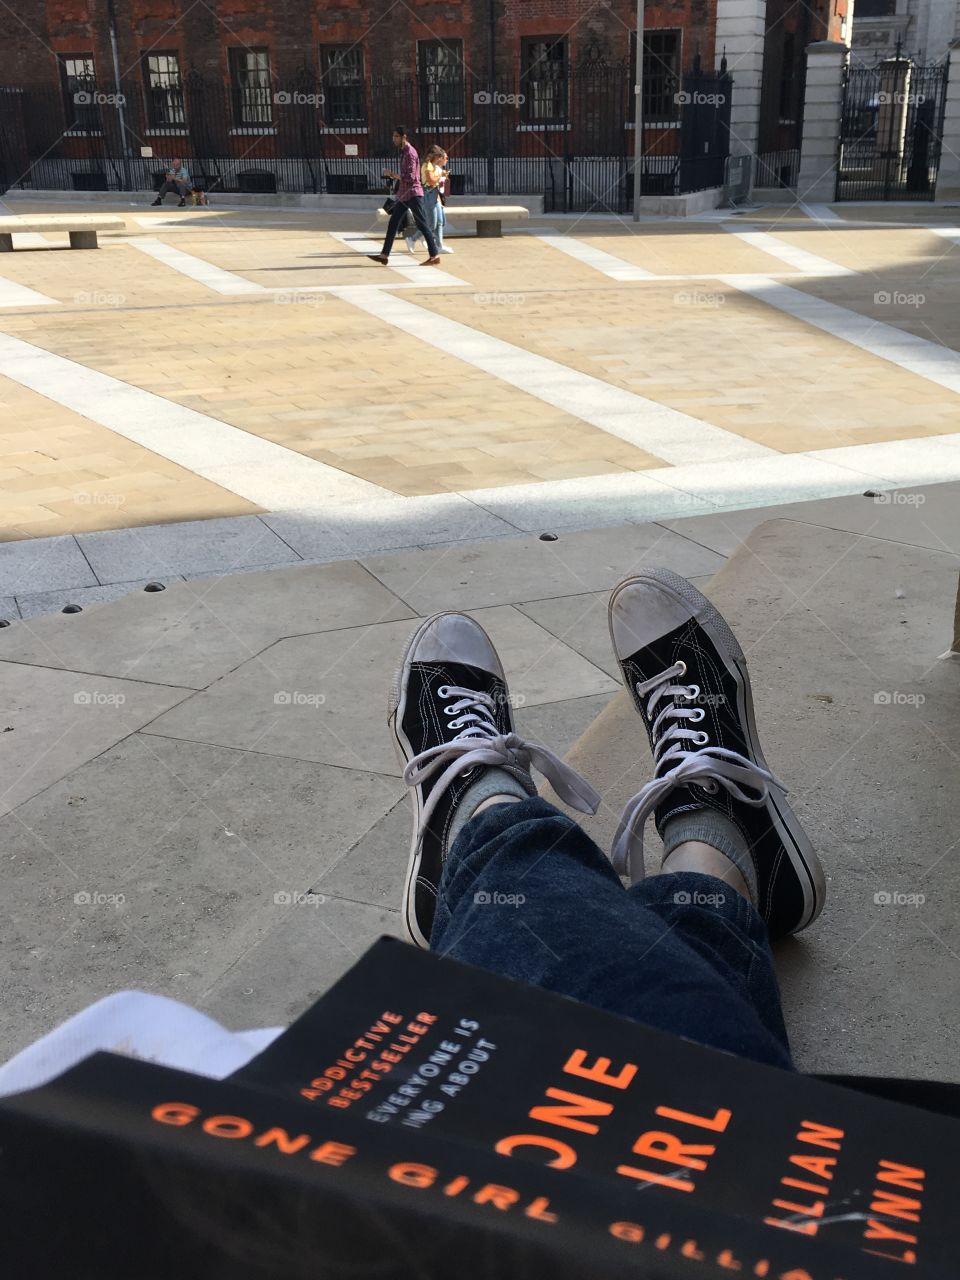 A picture of a persons legs crossed with the book Gone Girl on their lap. Taken in a public square in London. 